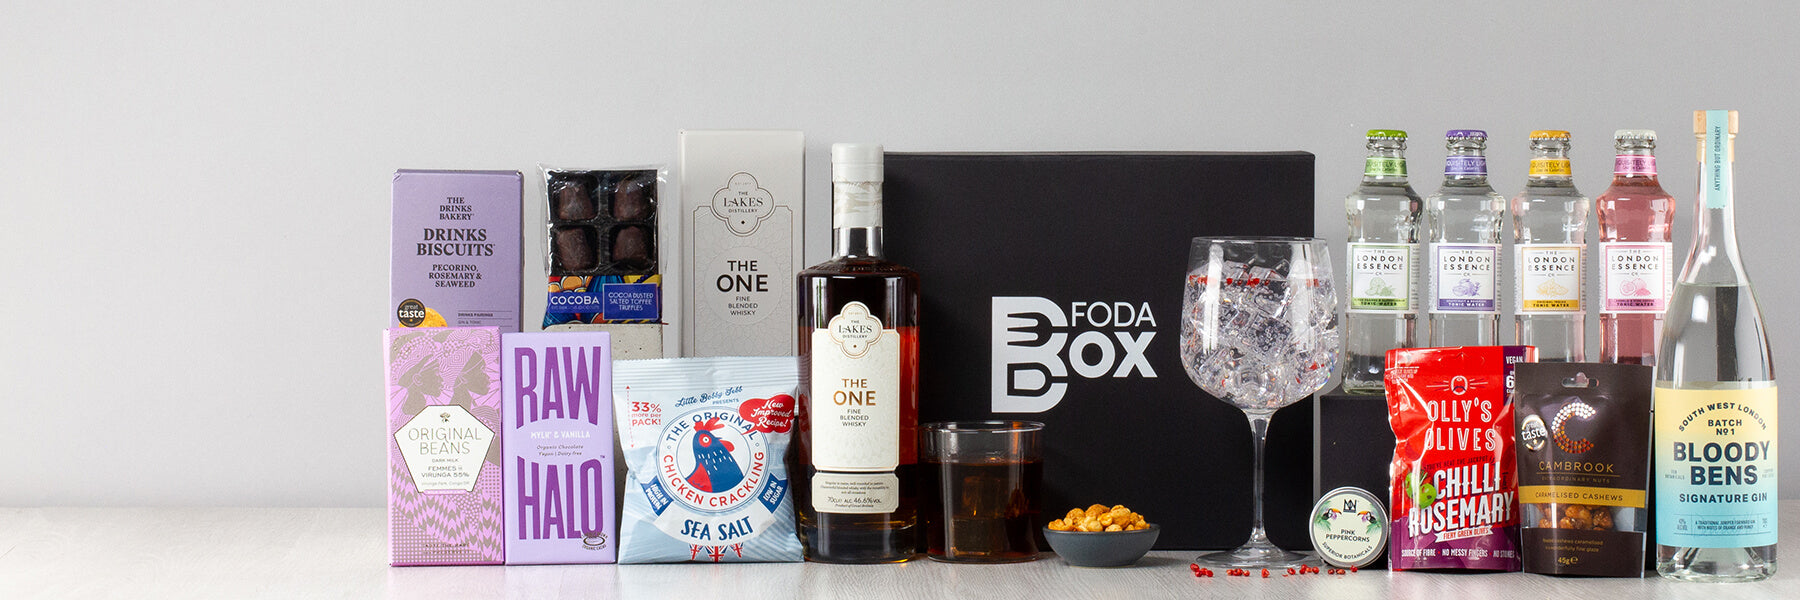 FodaBox Gifts Gin and Tonic Selection